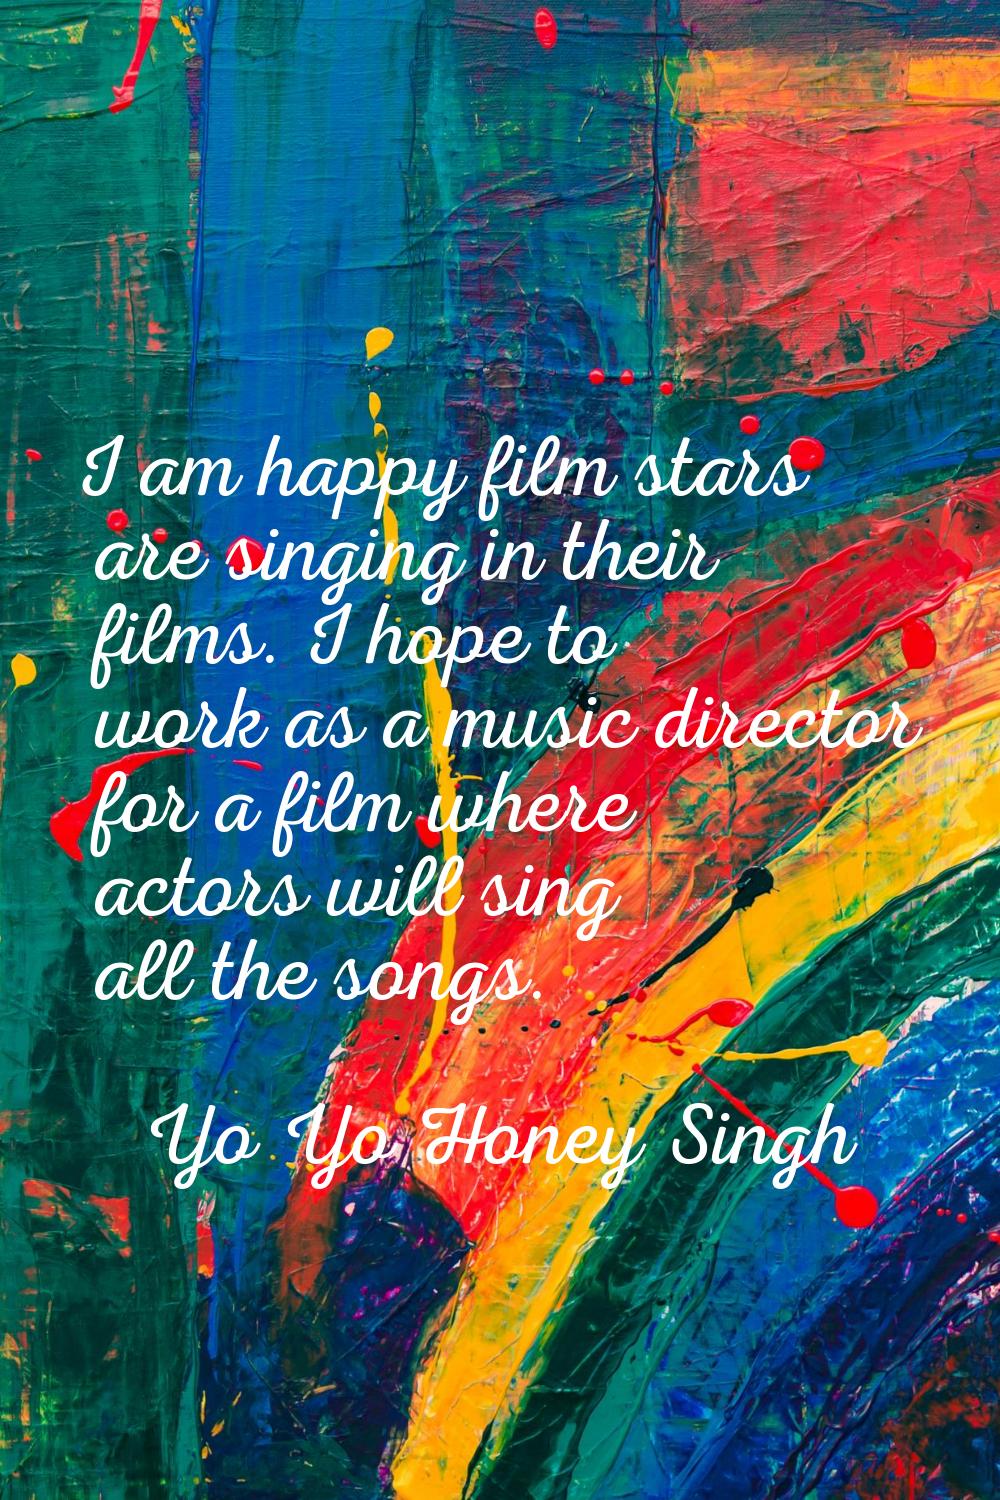 I am happy film stars are singing in their films. I hope to work as a music director for a film whe